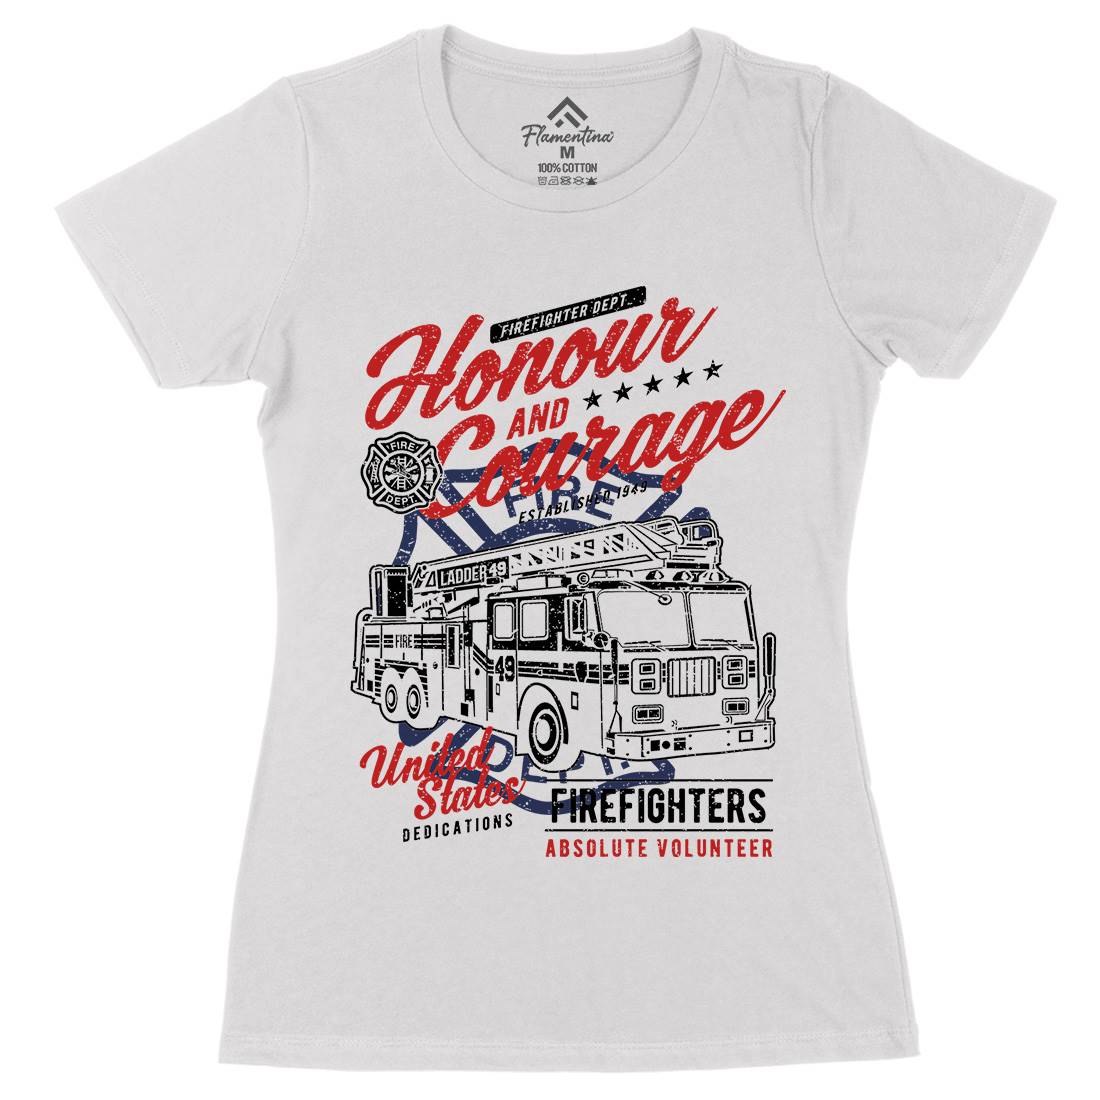 Honour And Courage Womens Organic Crew Neck T-Shirt Firefighters A684